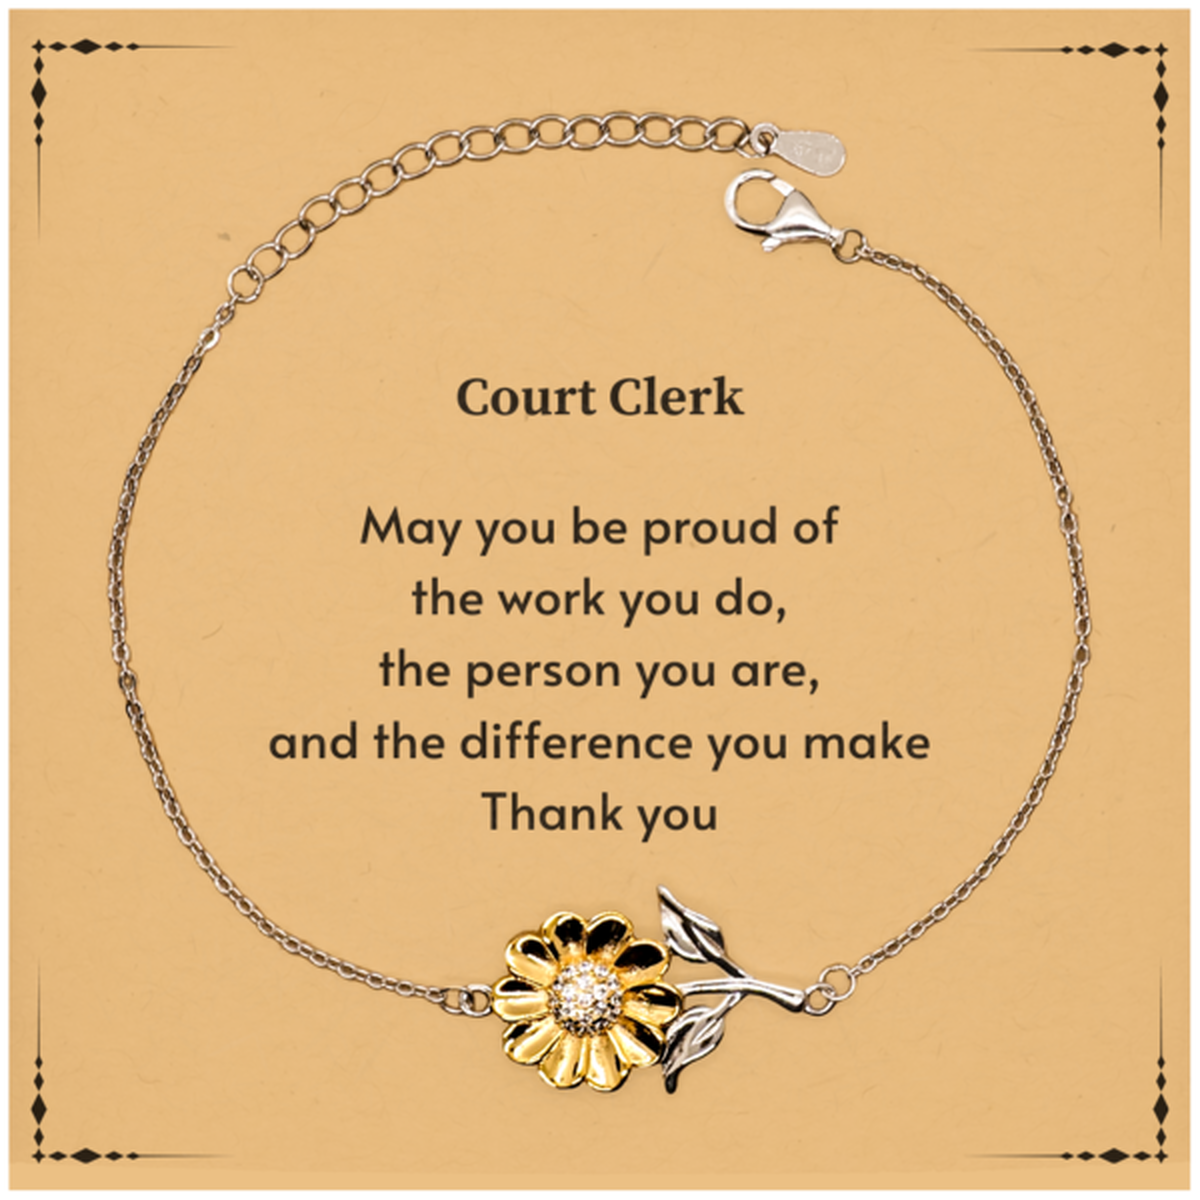 Heartwarming Sunflower Bracelet Retirement Coworkers Gifts for Court Clerk, Court Clerk May You be proud of the work you do, the person you are Gifts for Boss Men Women Friends